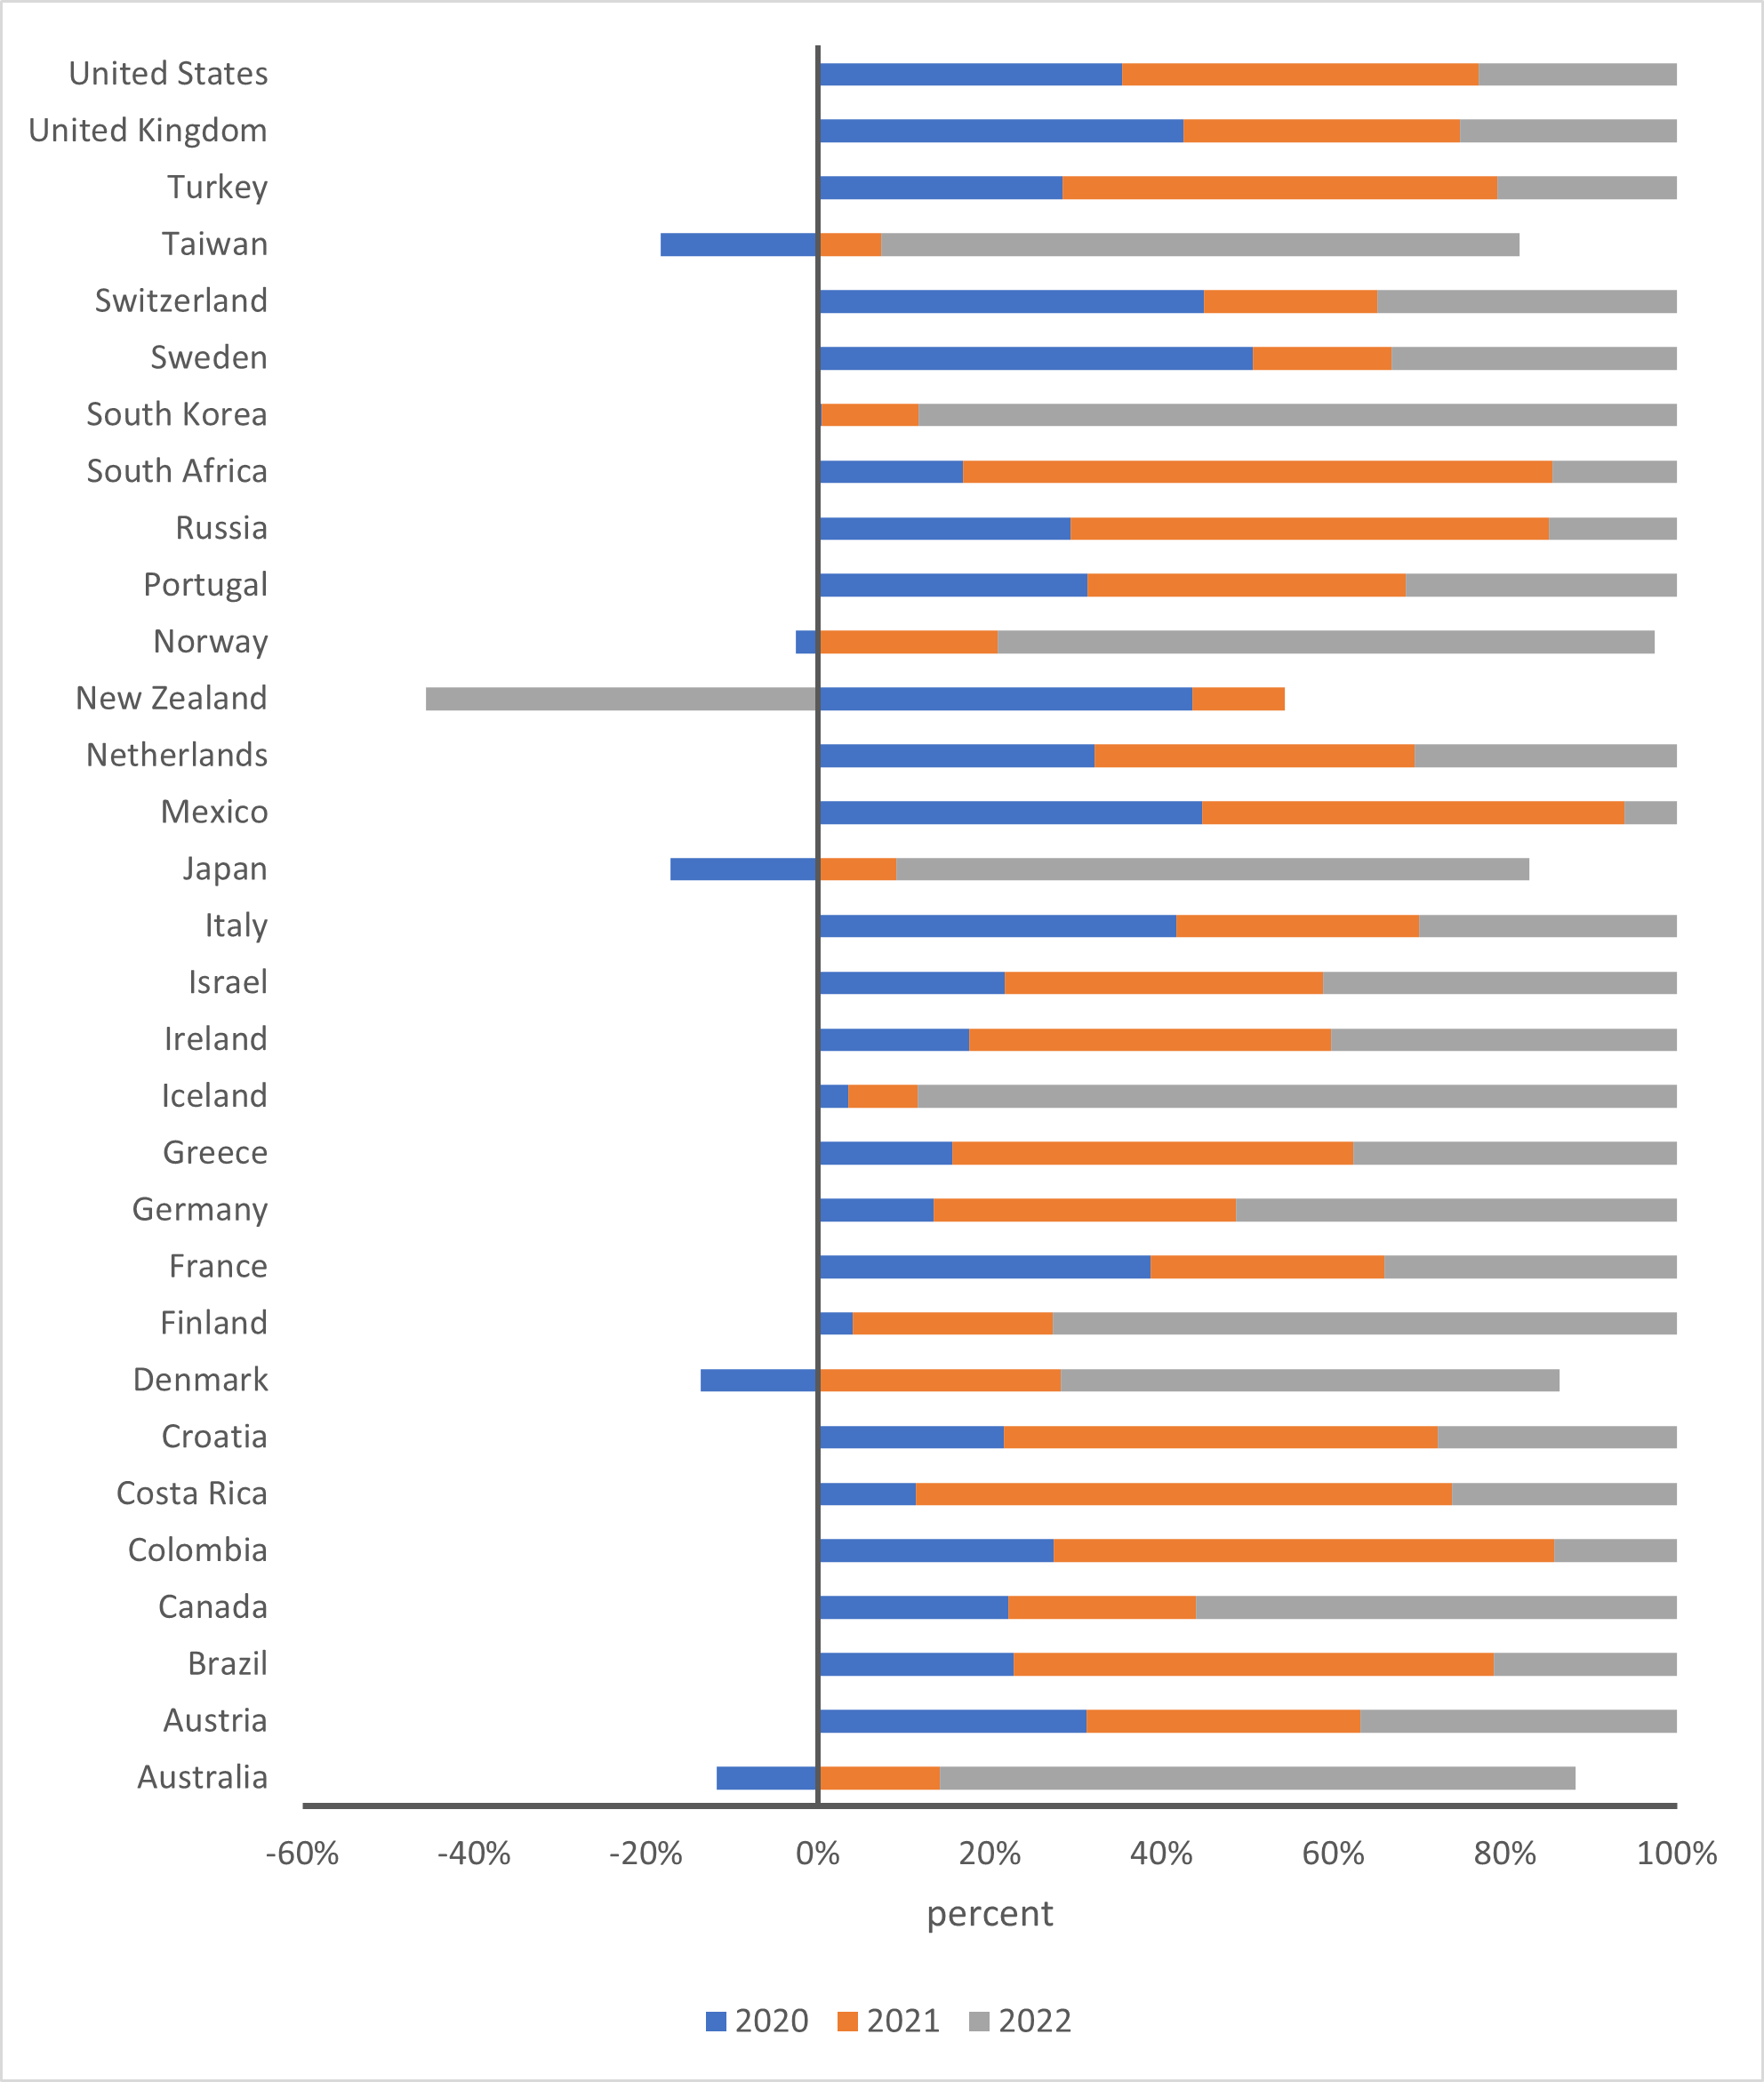 The 100% stacked bar chart shows the contribution to excess mortality per year among 30 countries. Majority of excess mortality in Australia occurred in 2020 and a similar trend was observed in Japan, Denmark, Taiwan and Norway, while New Zealand experienced majority of excess deaths in 2022.